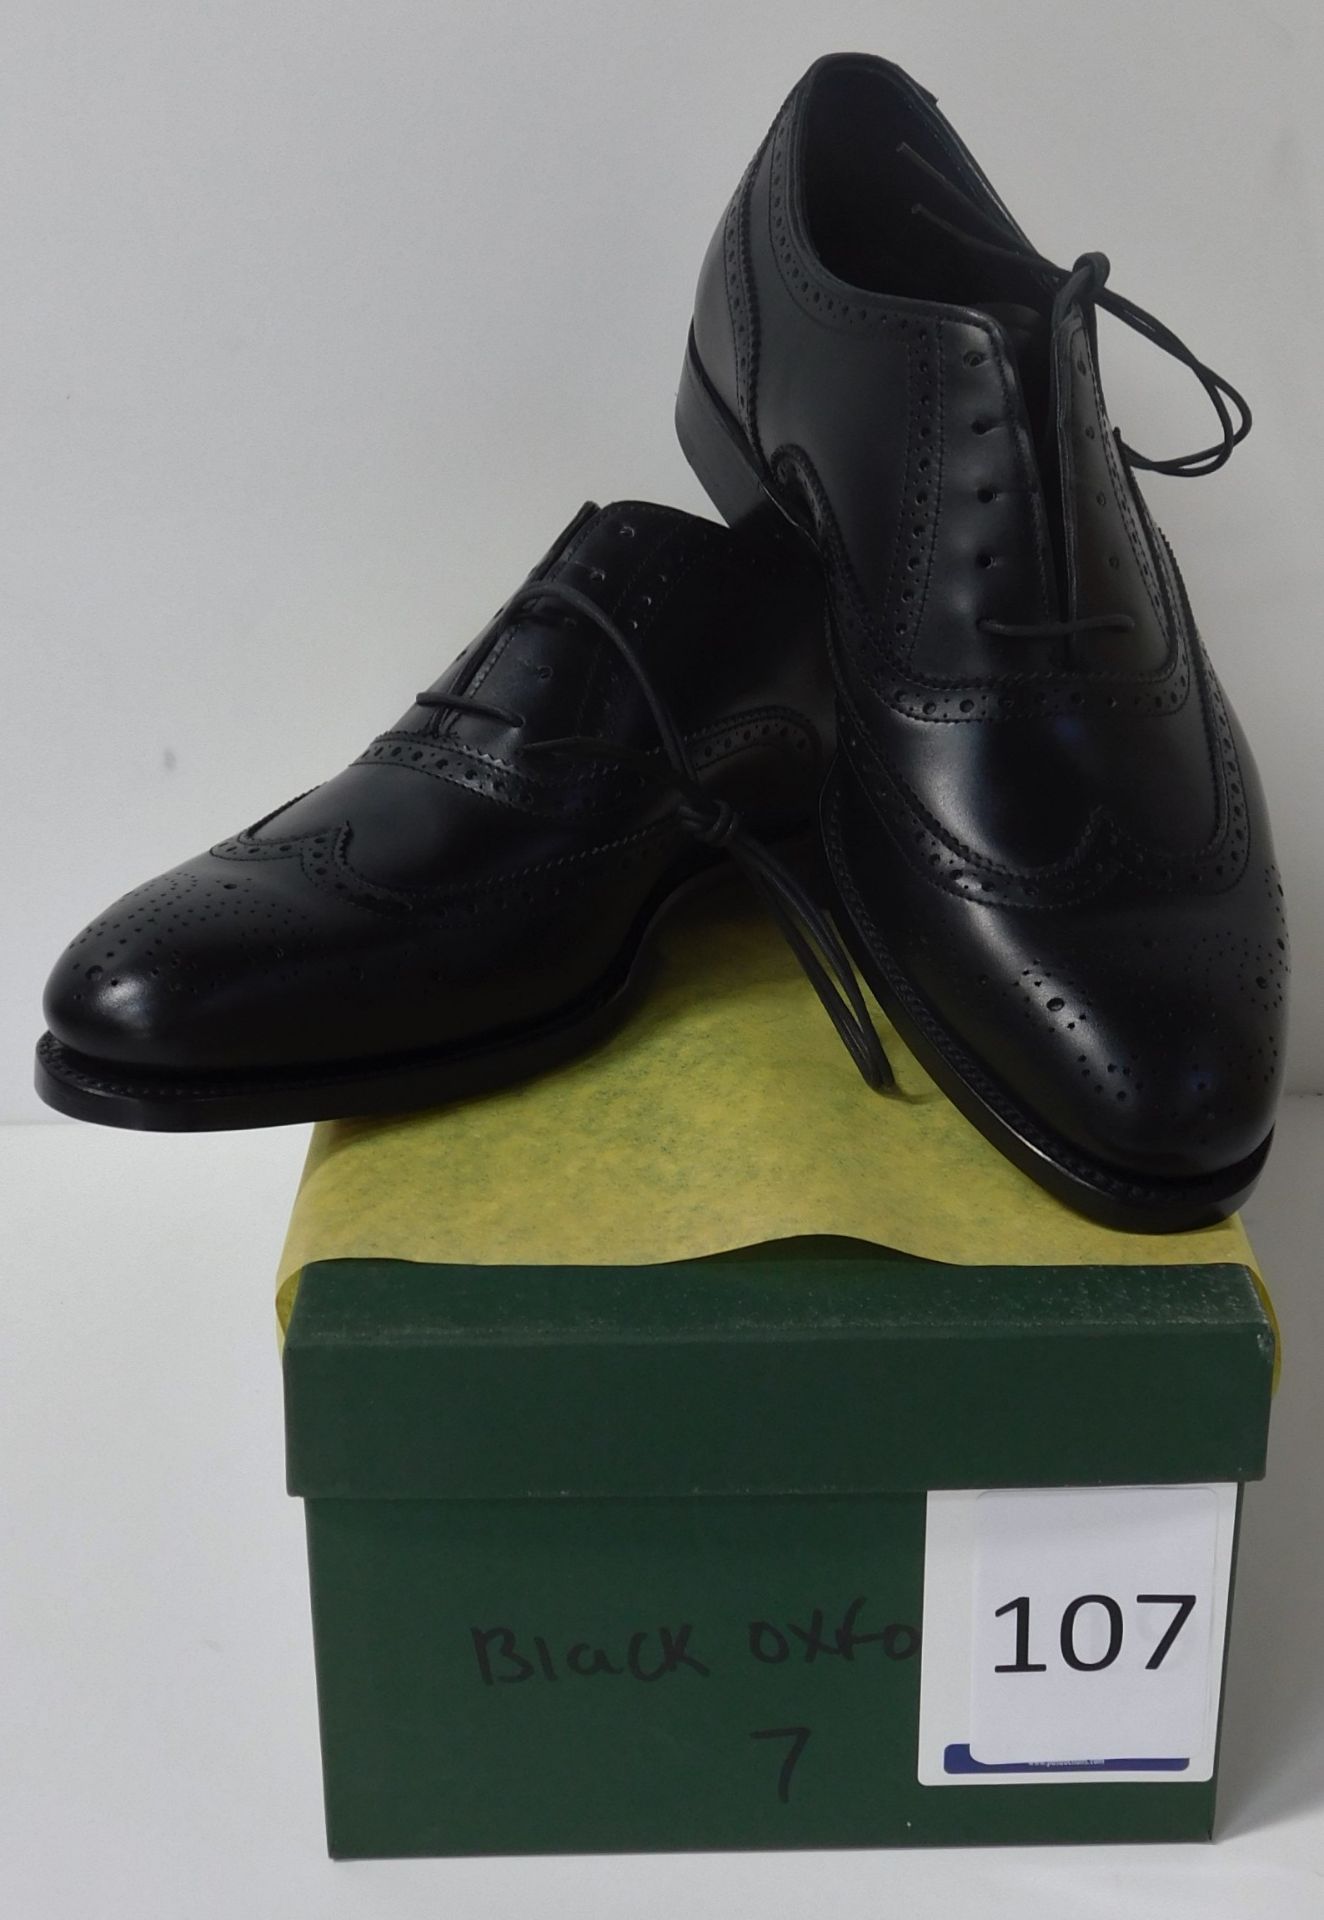 Pair of Alfred Sargent Black Oxford, Size 7 (Slight Seconds) (Location: Brentwood - See General